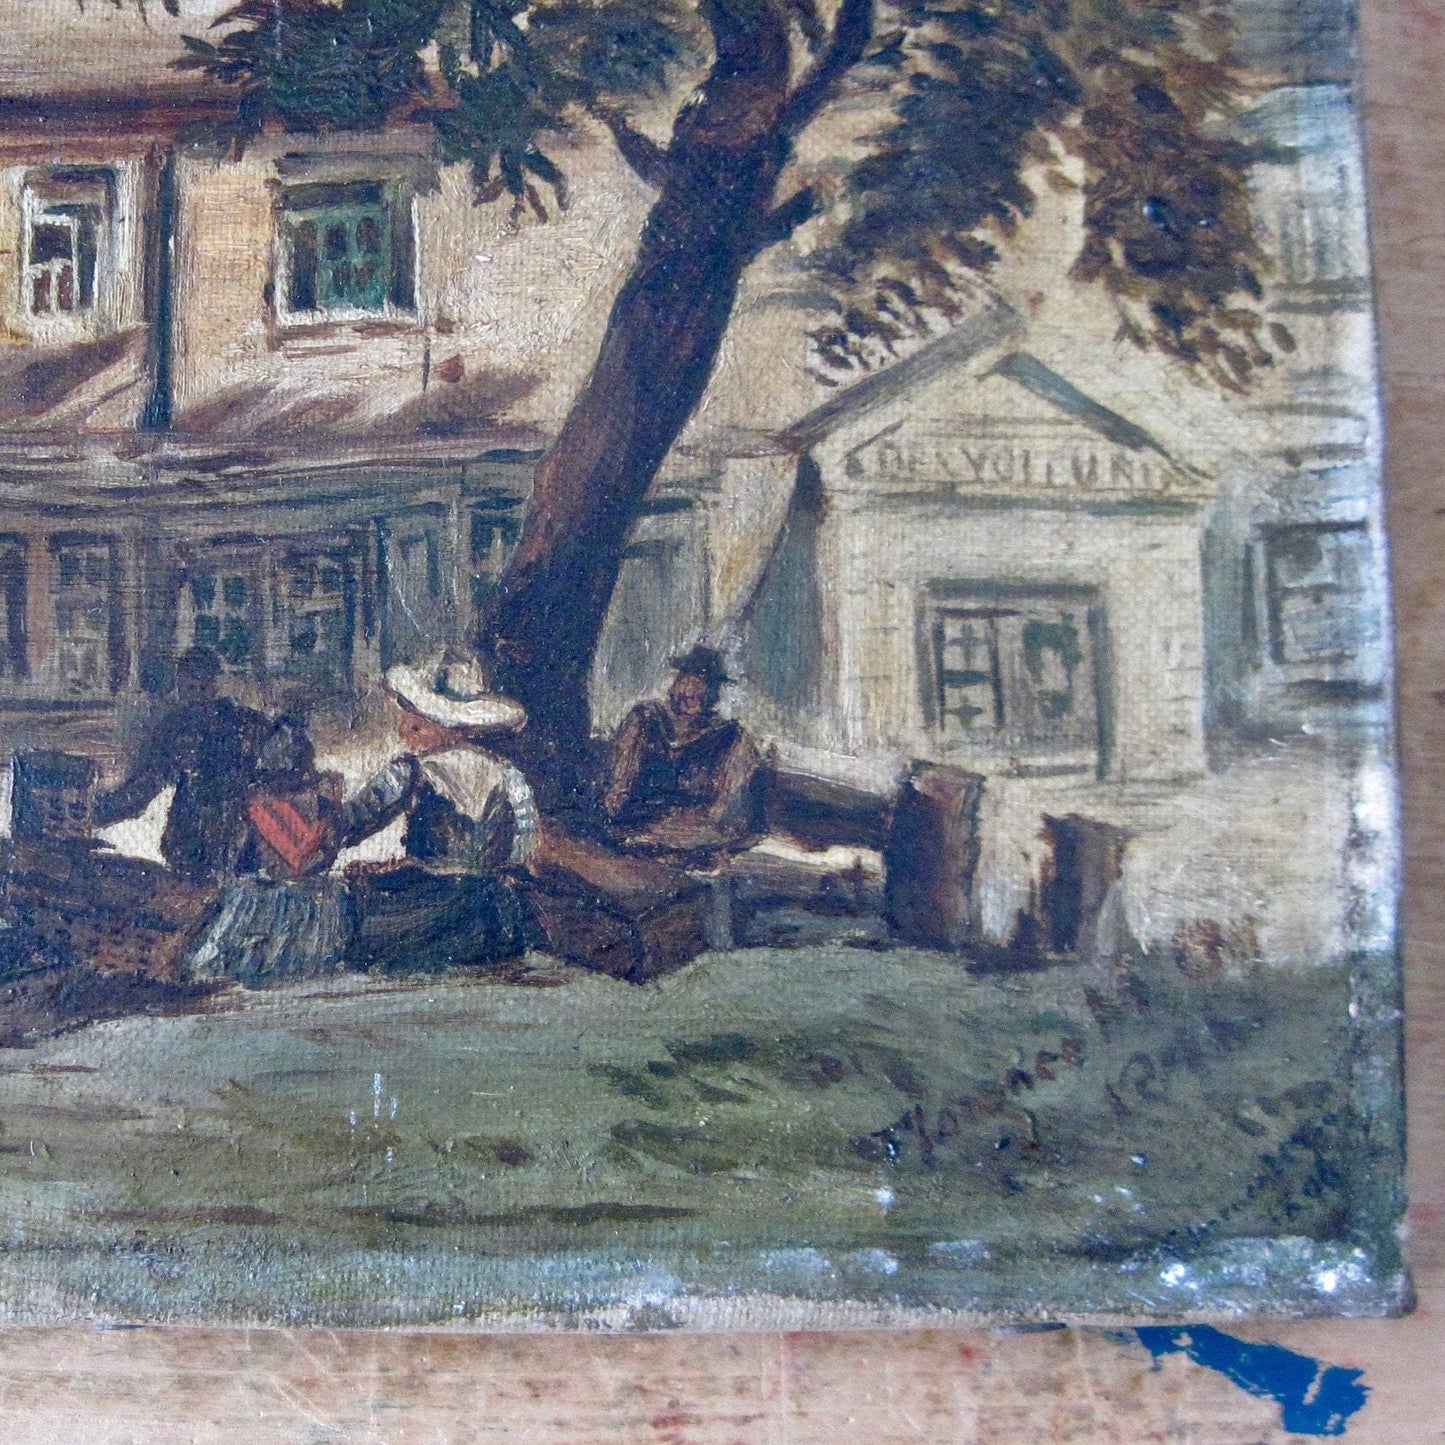 Antique Oil Painting of Village Scene by Florence McCoy (c.1800s)